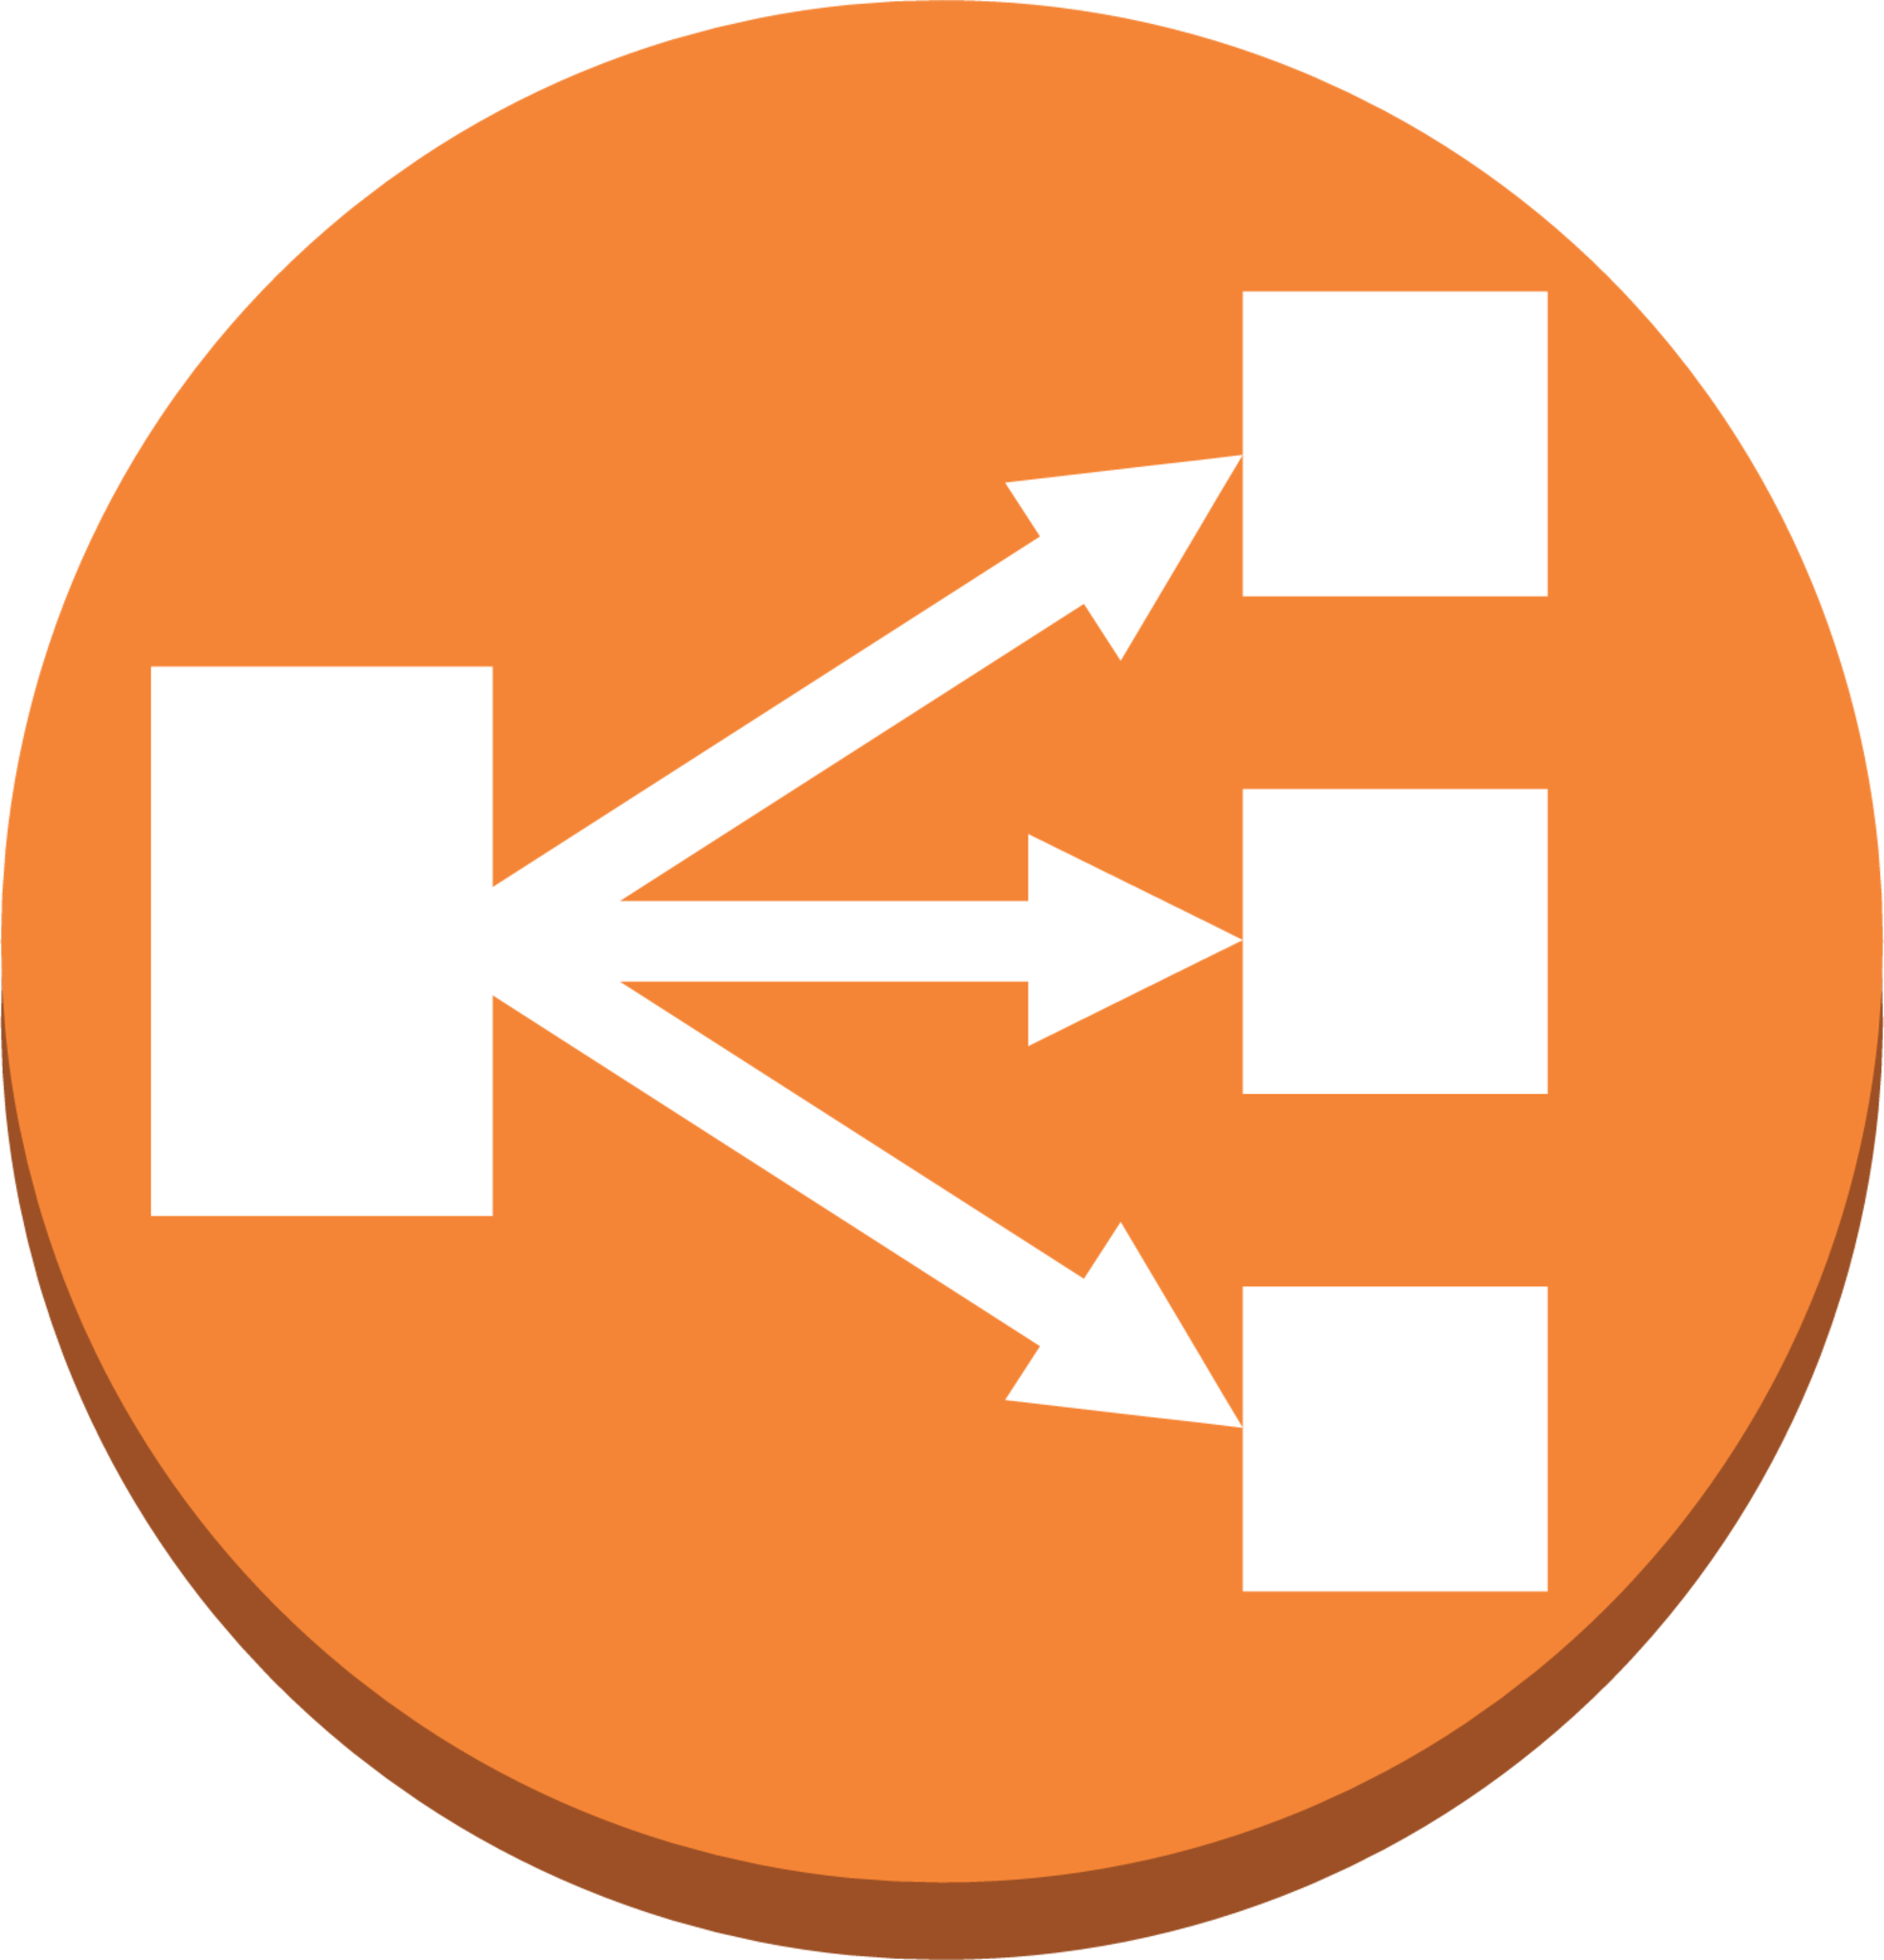 Networking Content Delivery Elastic Load Balancing ClassicLoadBalancer icon